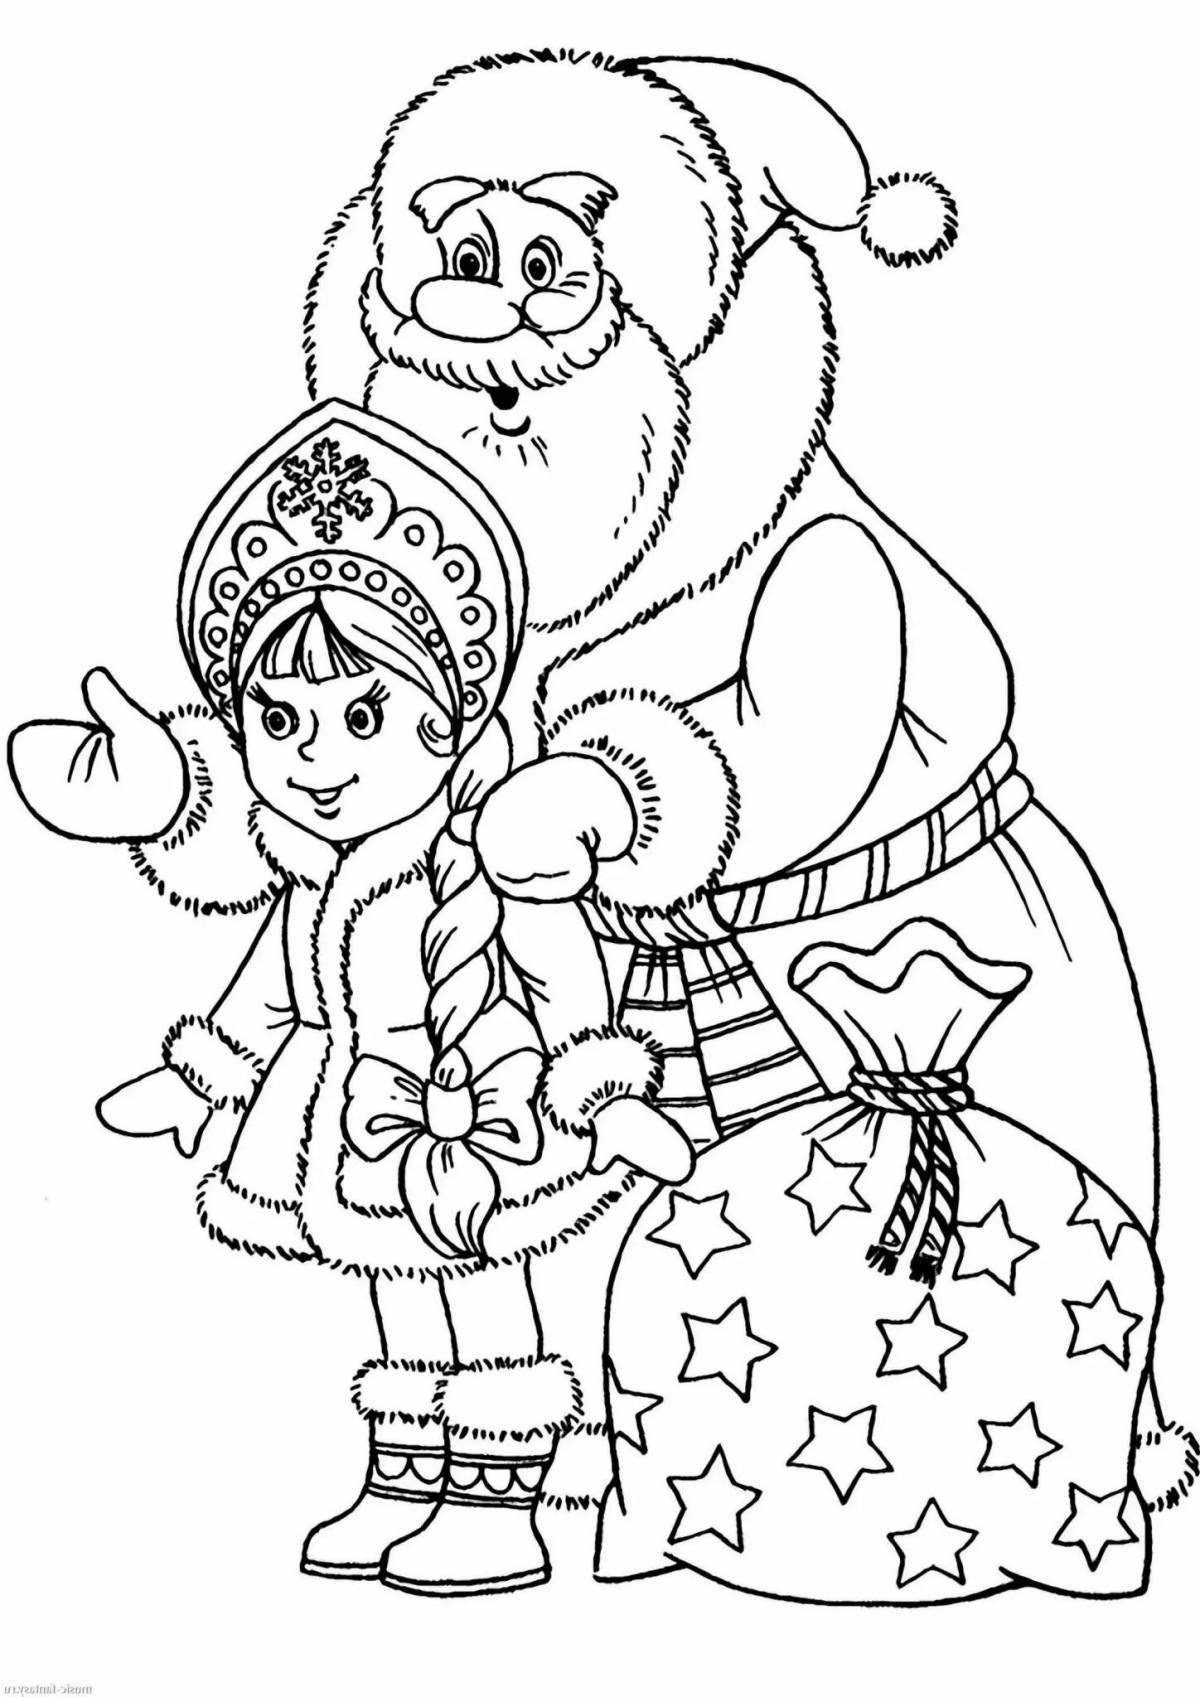 Snow Maiden coloring page